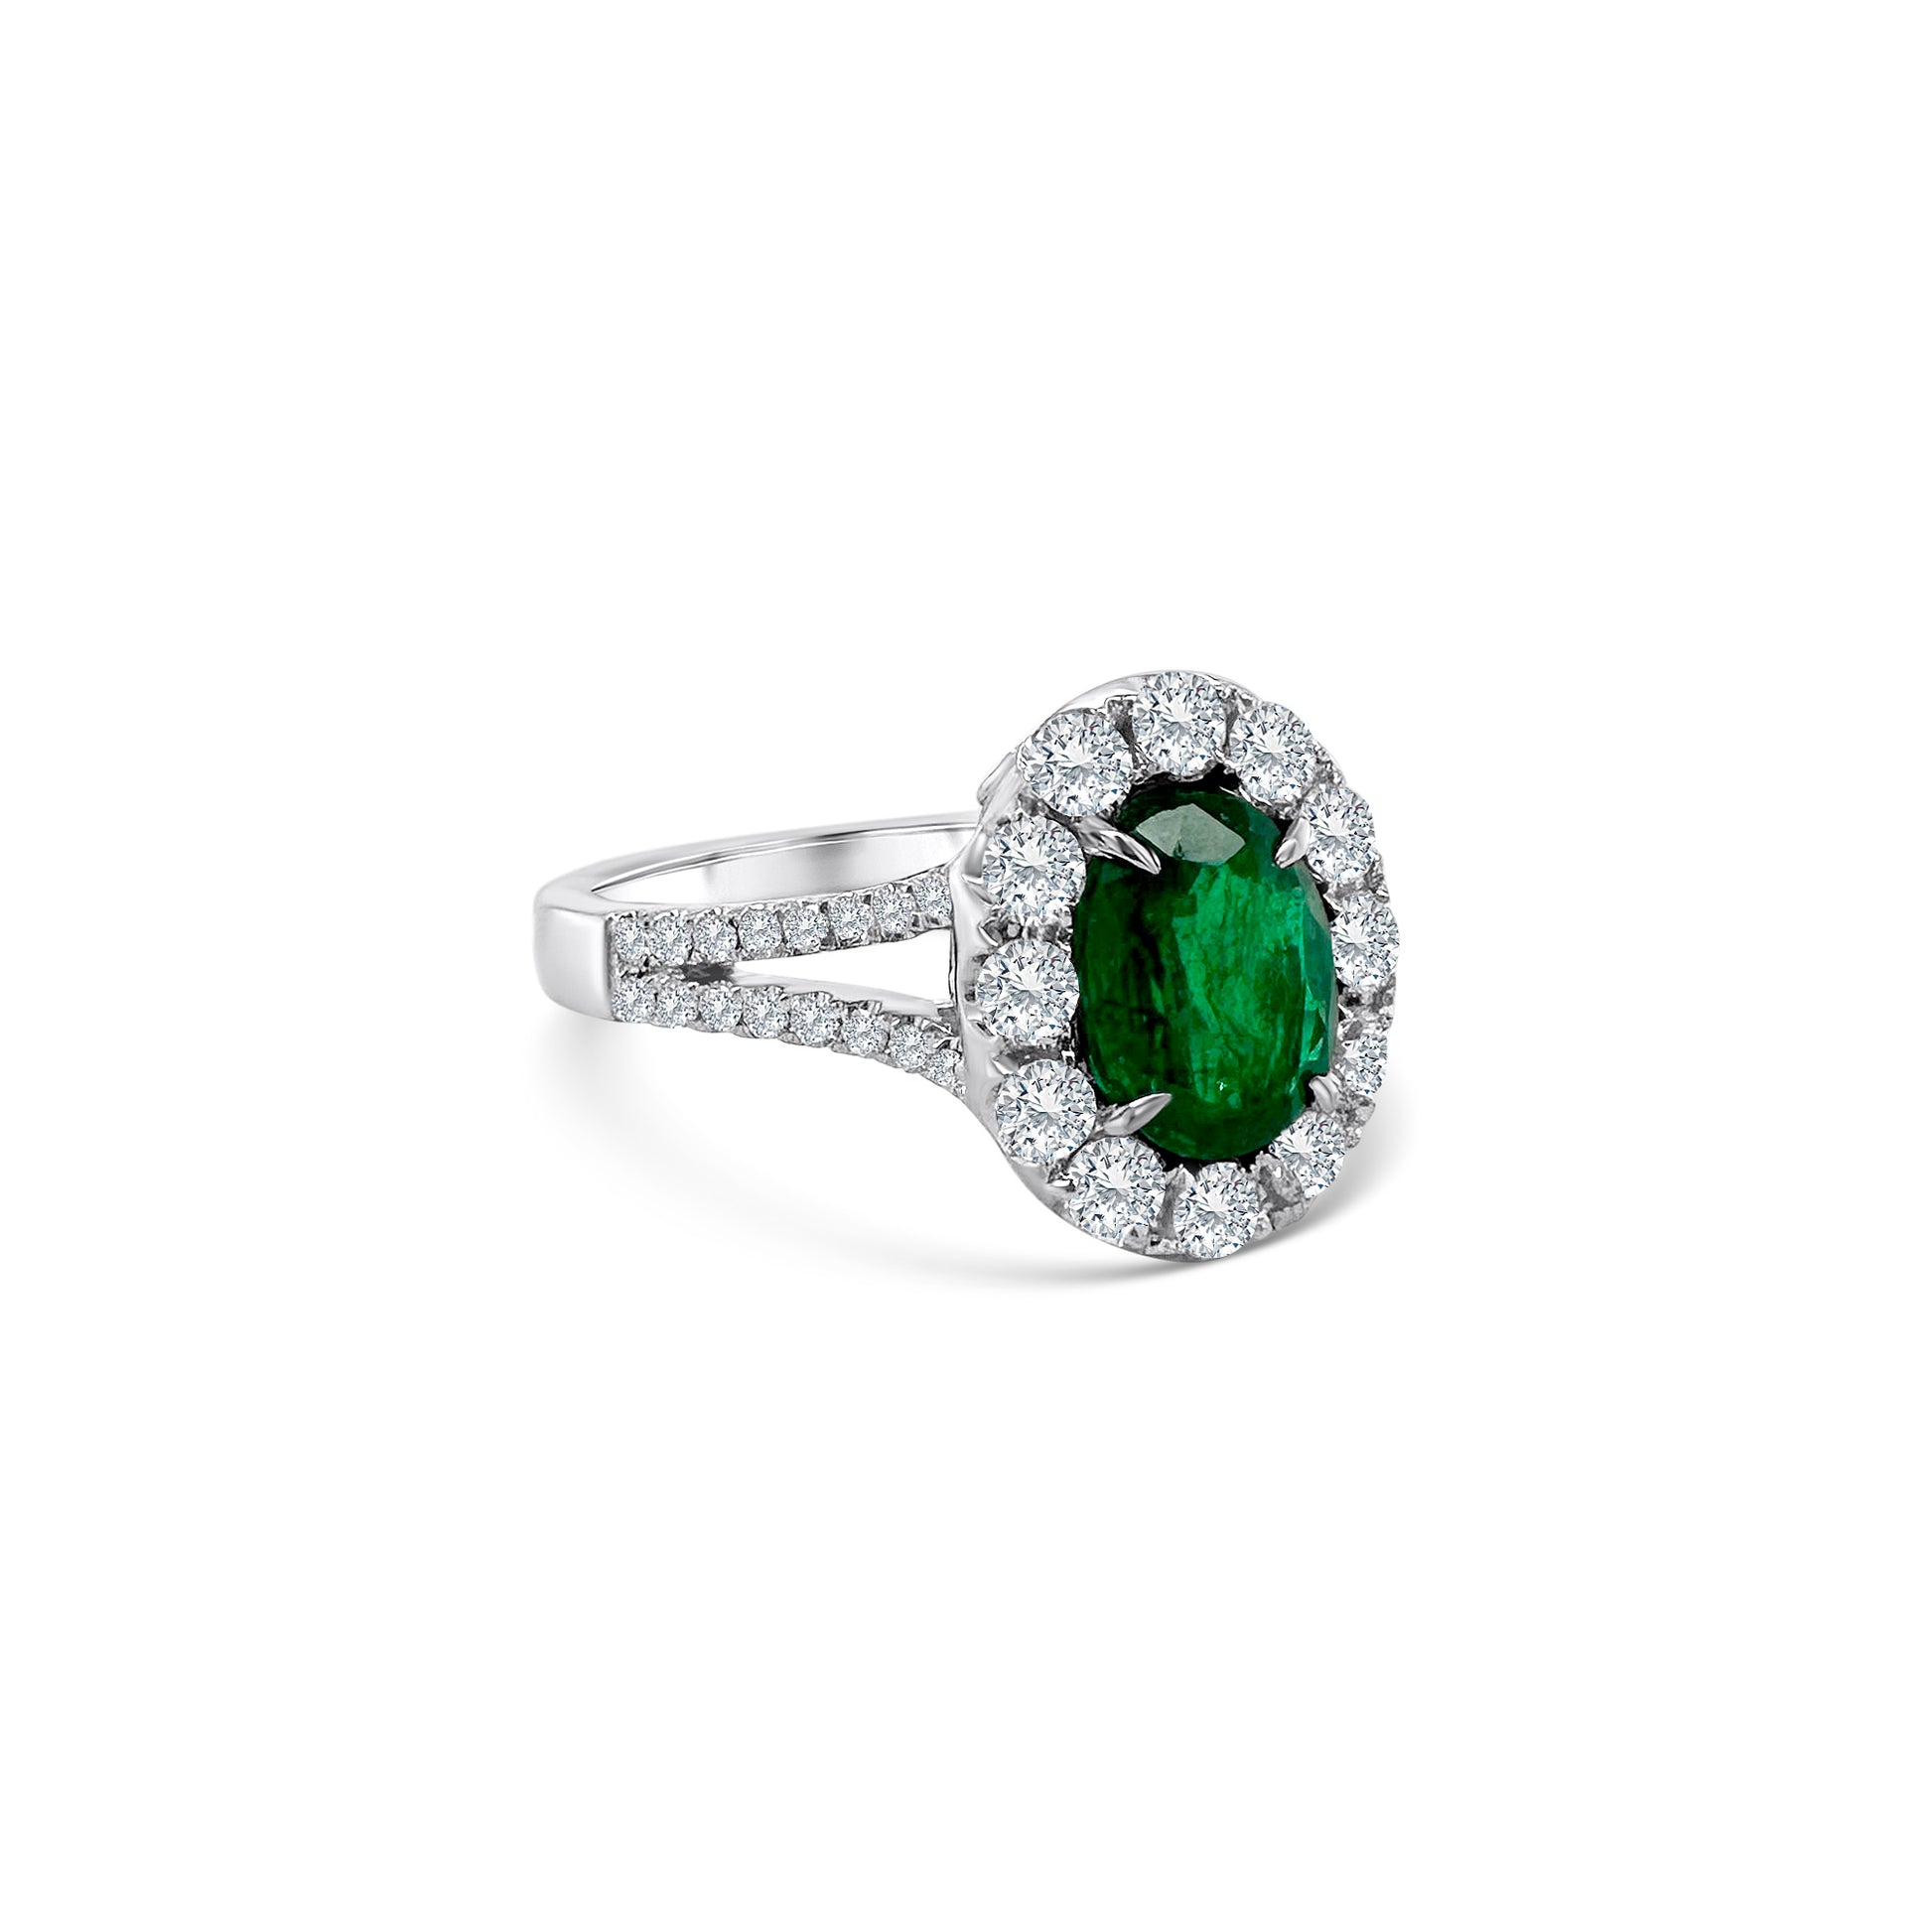  Oval emerald and diamond halo ring, showcasing a vibrant green emerald surrounded by sparkling diamonds, perfect for adding elegance and sophistication to any ensemble.